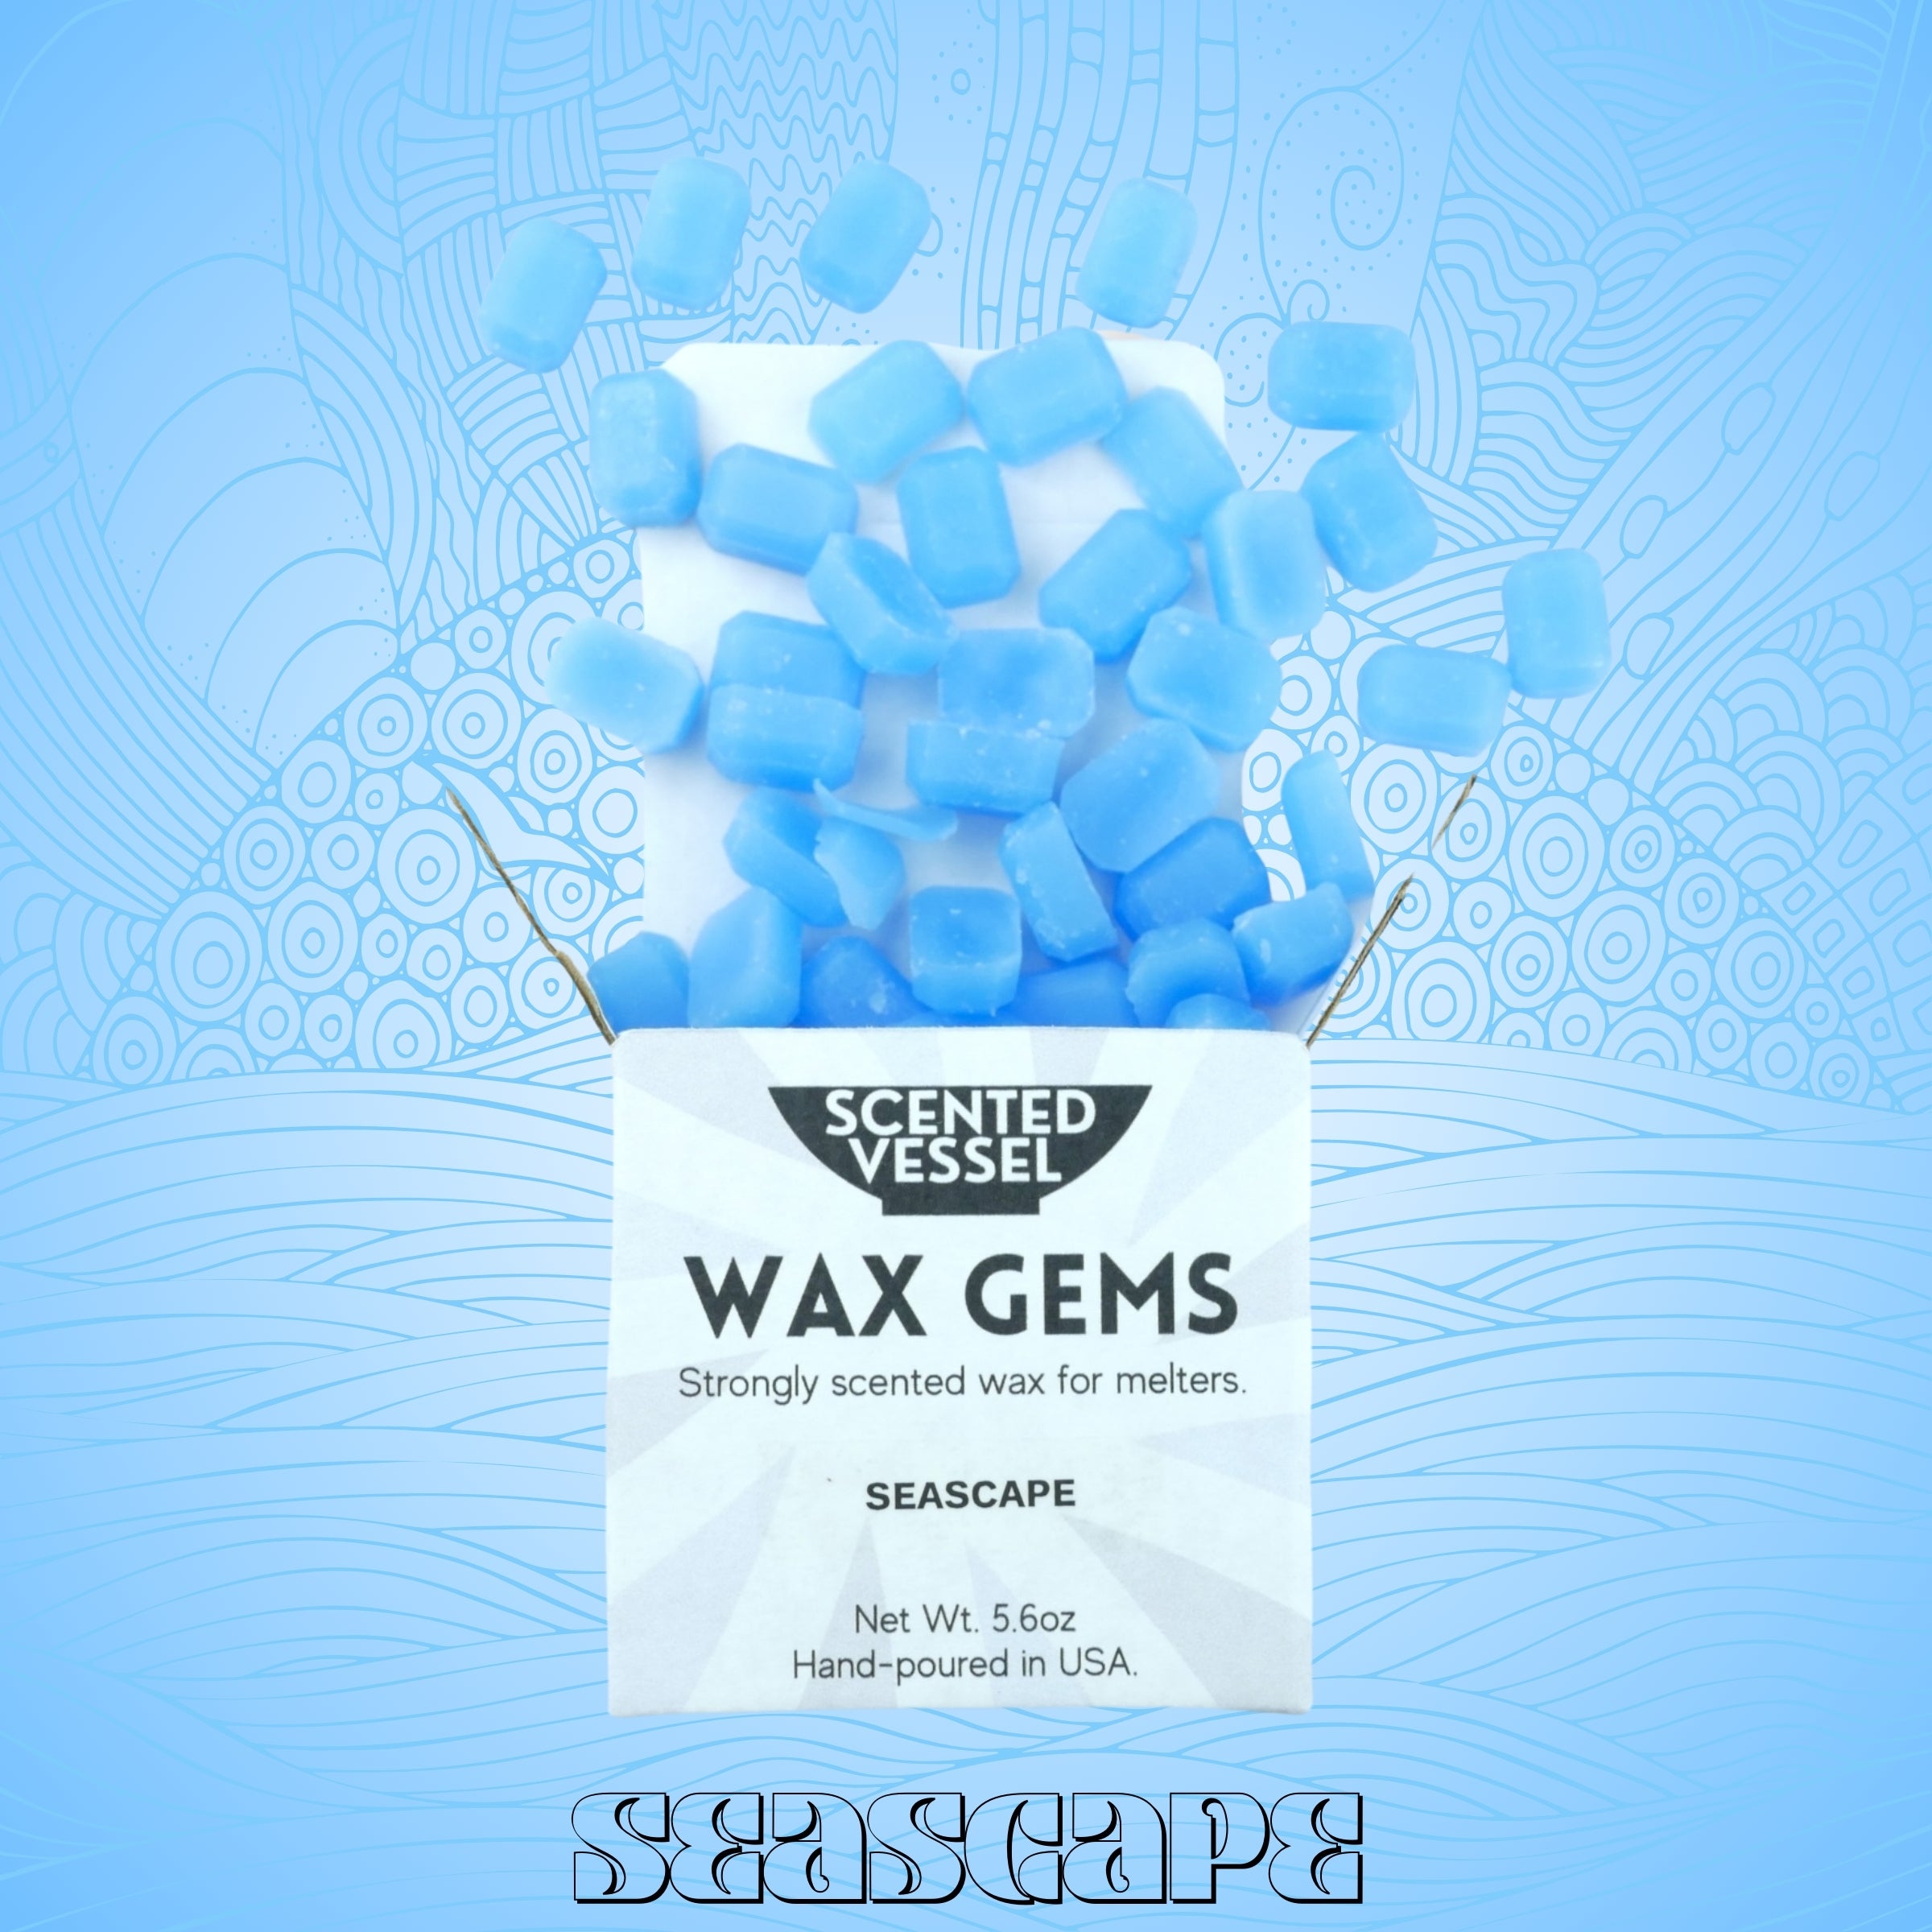 Seascape 5.6oz Wax Gems by Scented Vessel